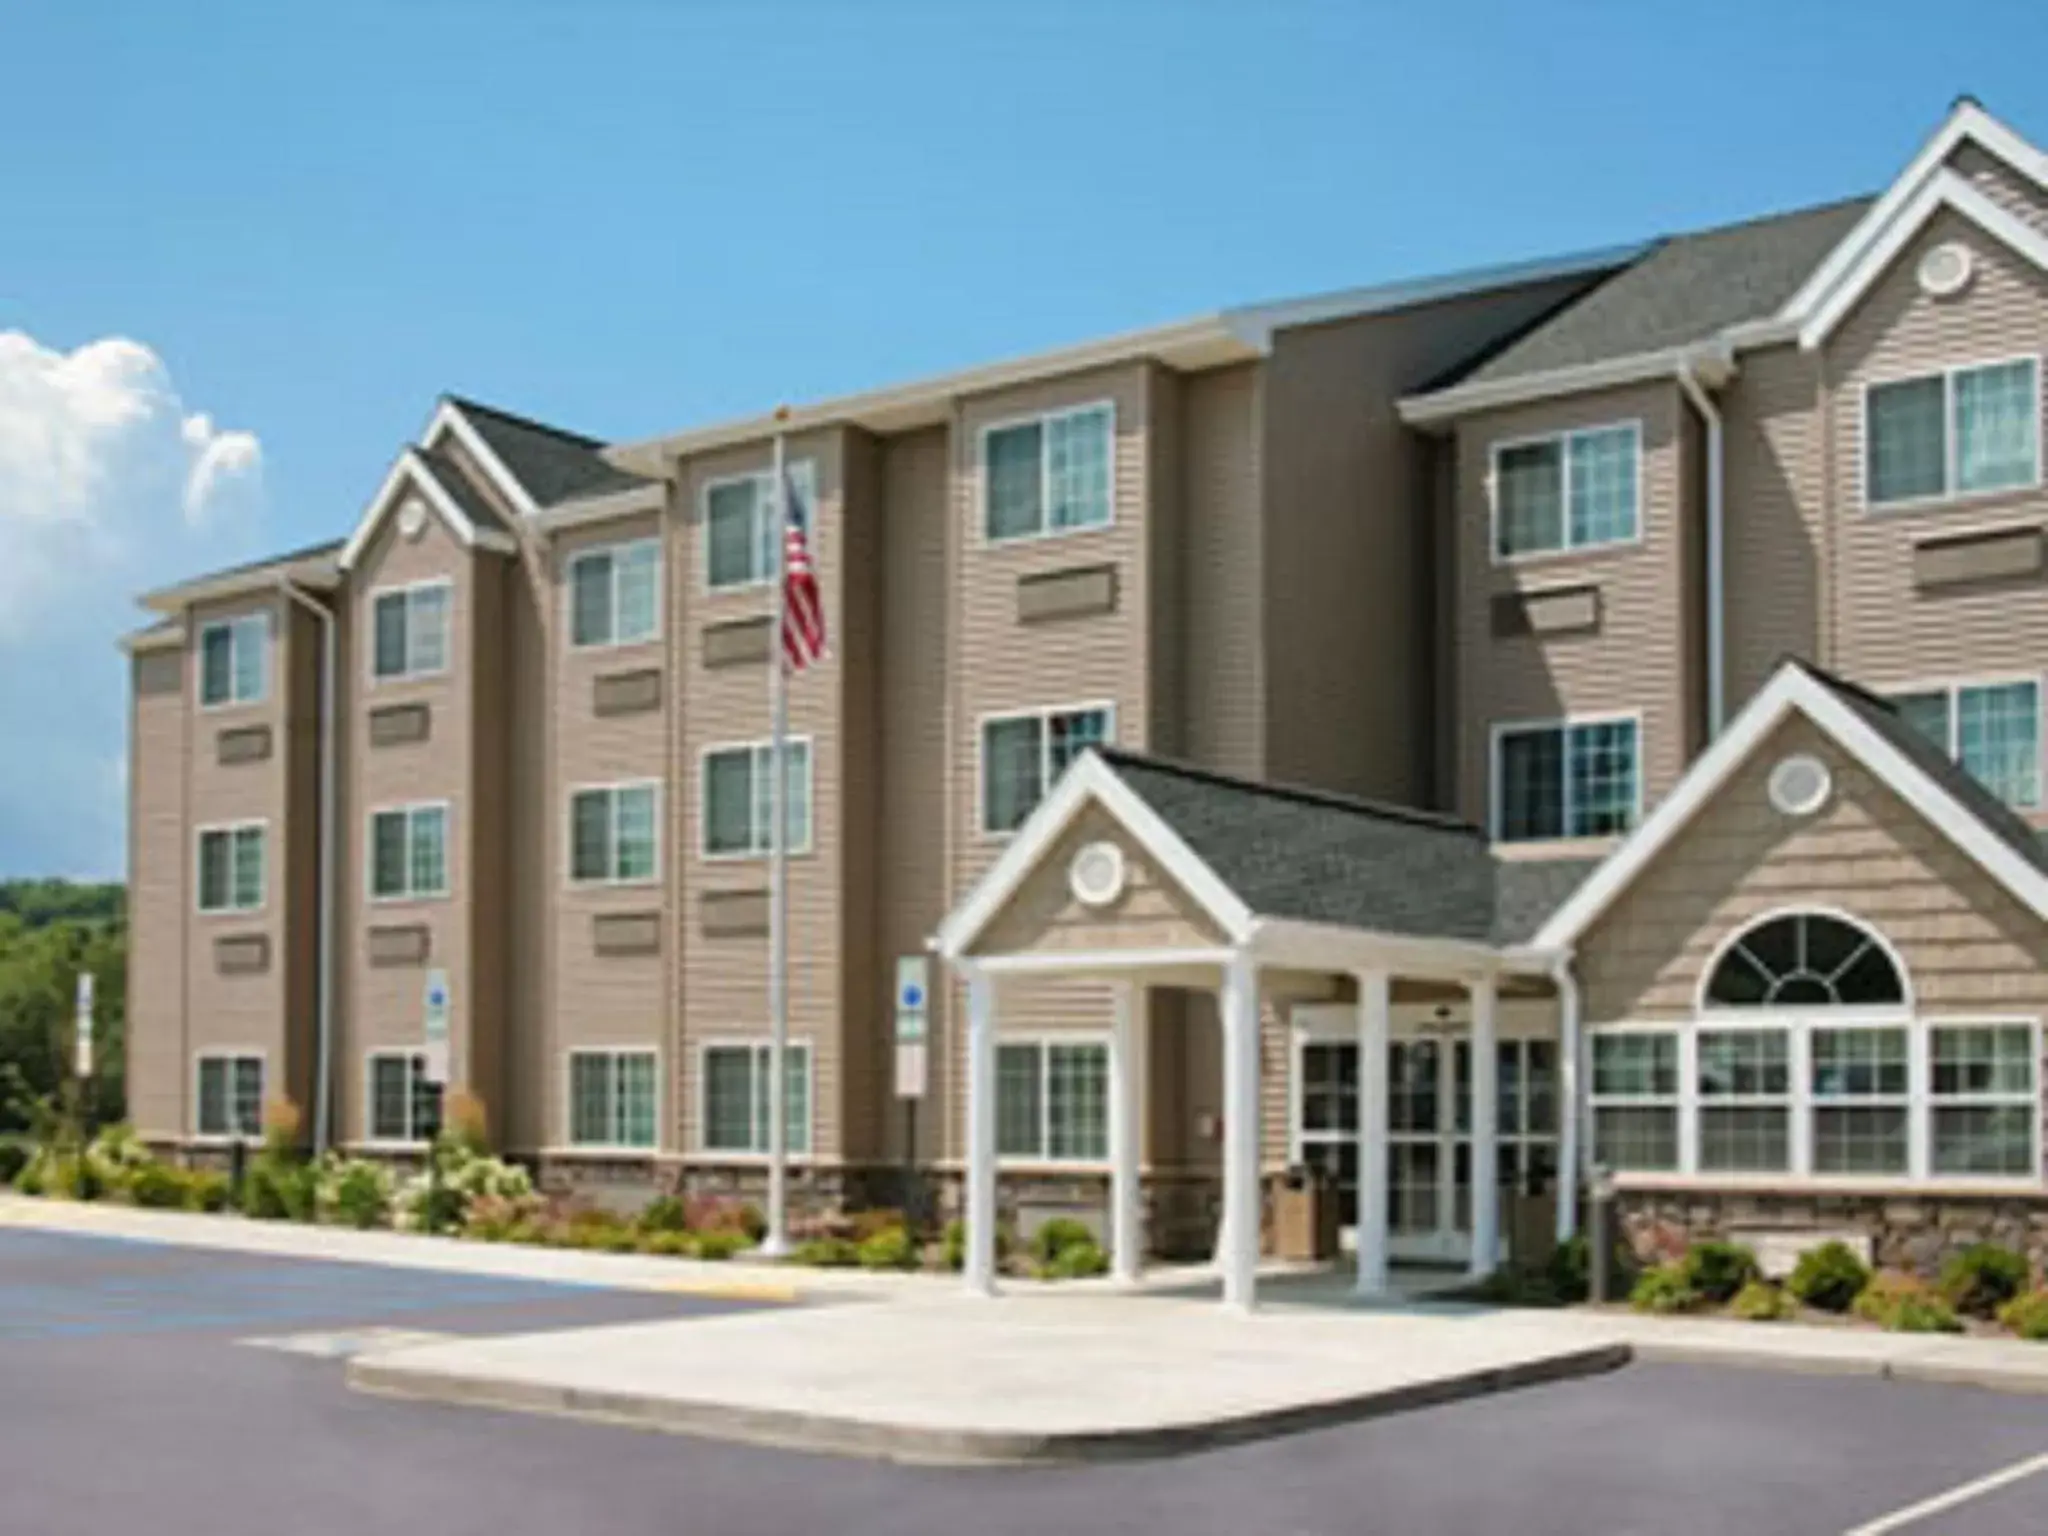 Facade/entrance, Property Building in Microtel Inn & Suites Mansfield PA